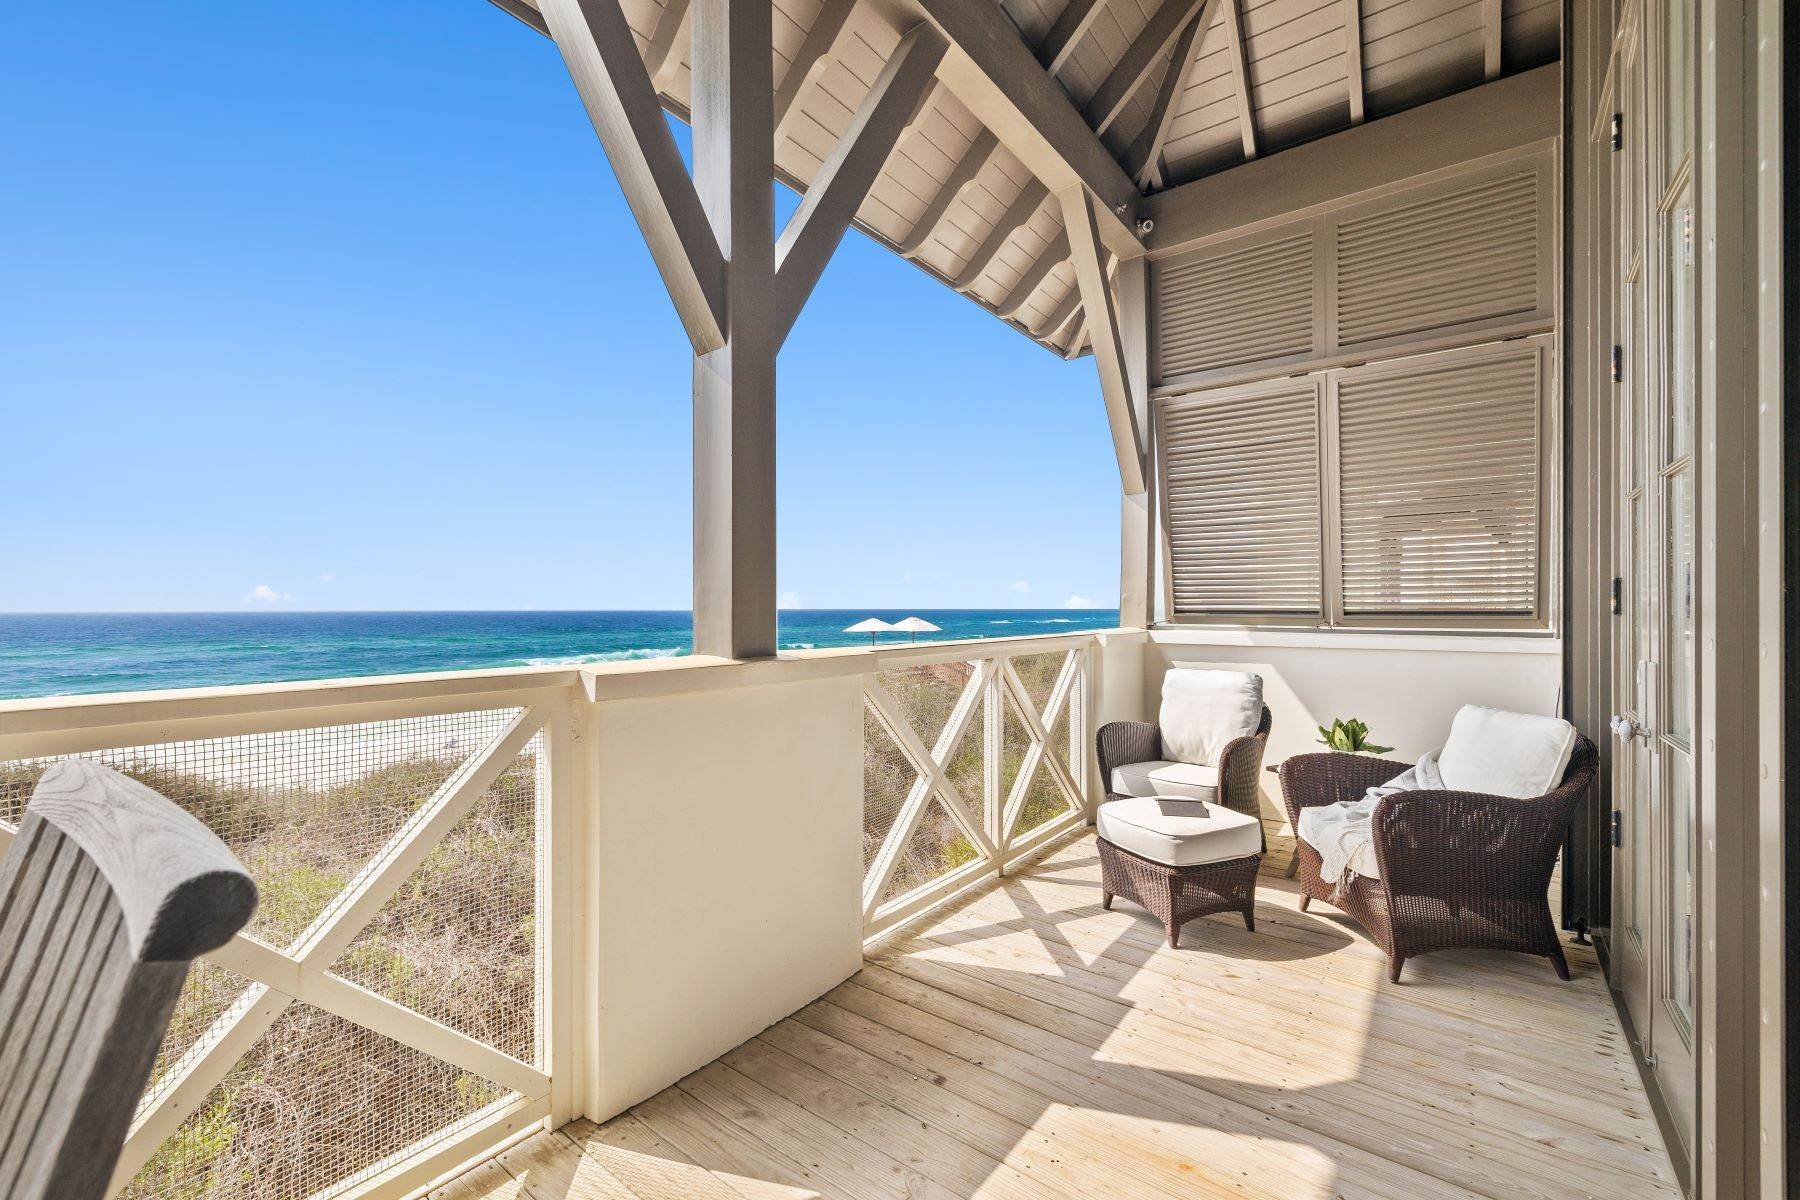 Single Family Homes for Sale at Gulf Front Retreat With Fireplaces, Porches And A Carriage House 26 Atwoods Court Rosemary Beach, Florida 32461 United States